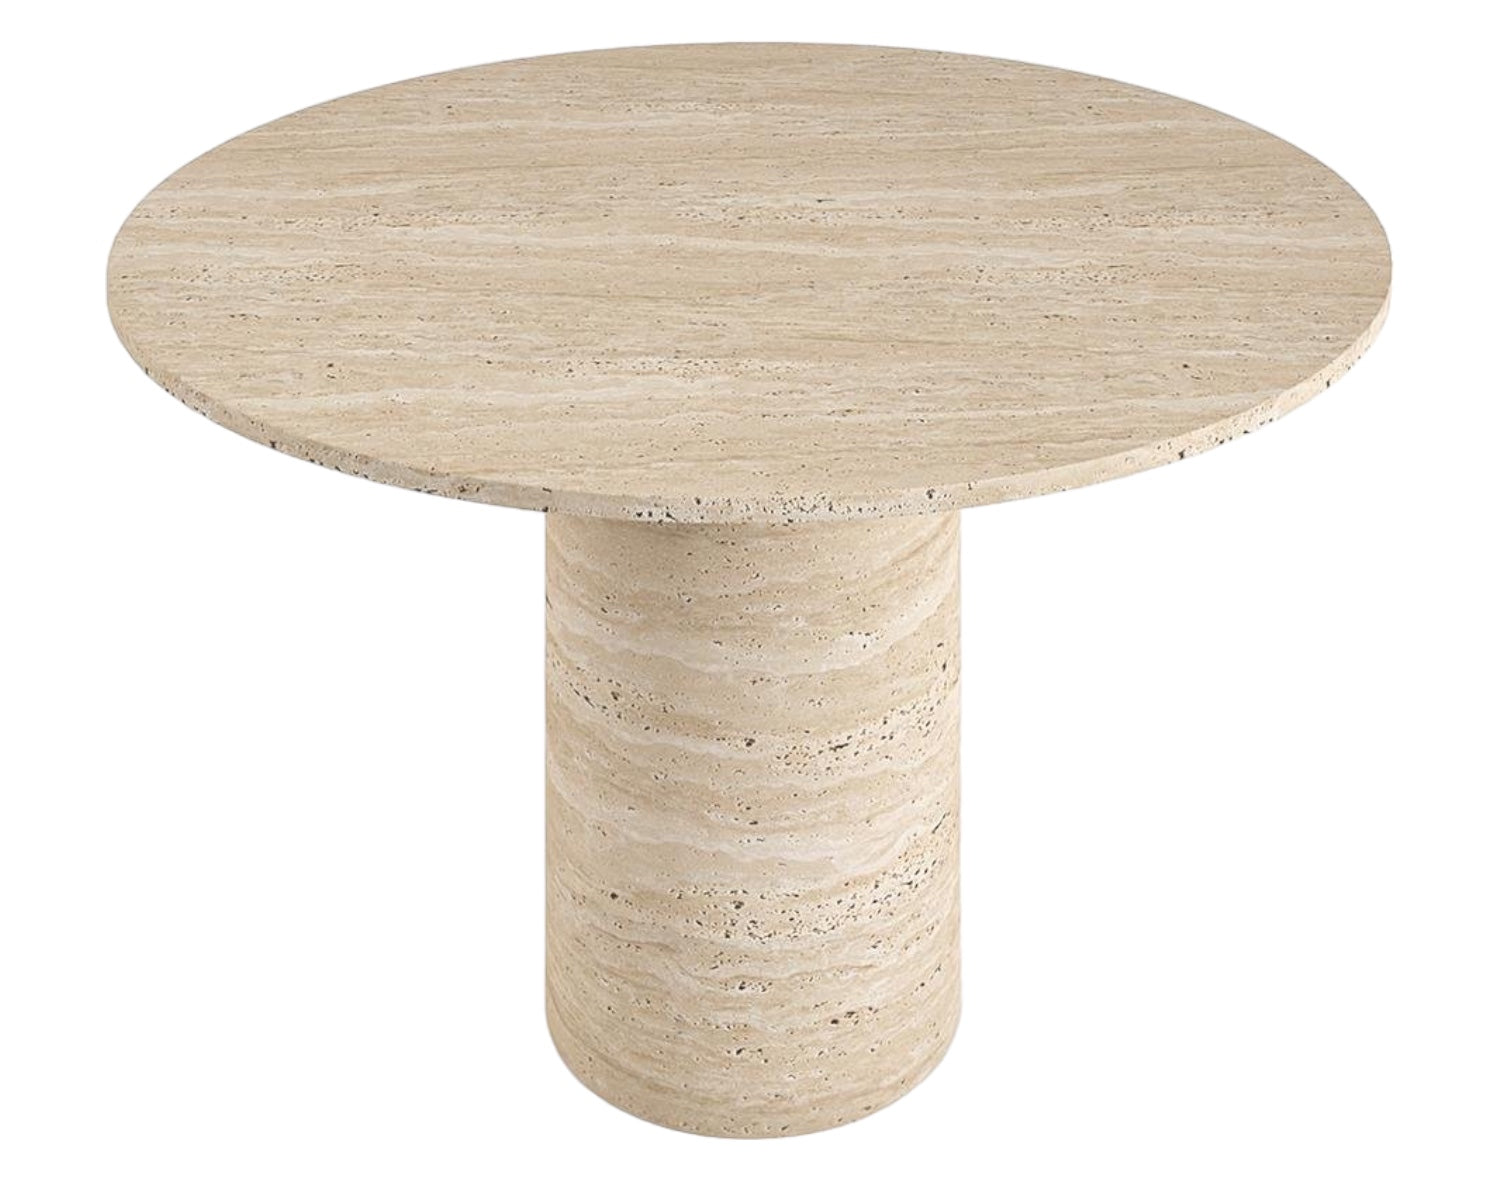 CARLA HAND CRAFTED ORGANIC TRAVERTINE ROUND DINING TABLE